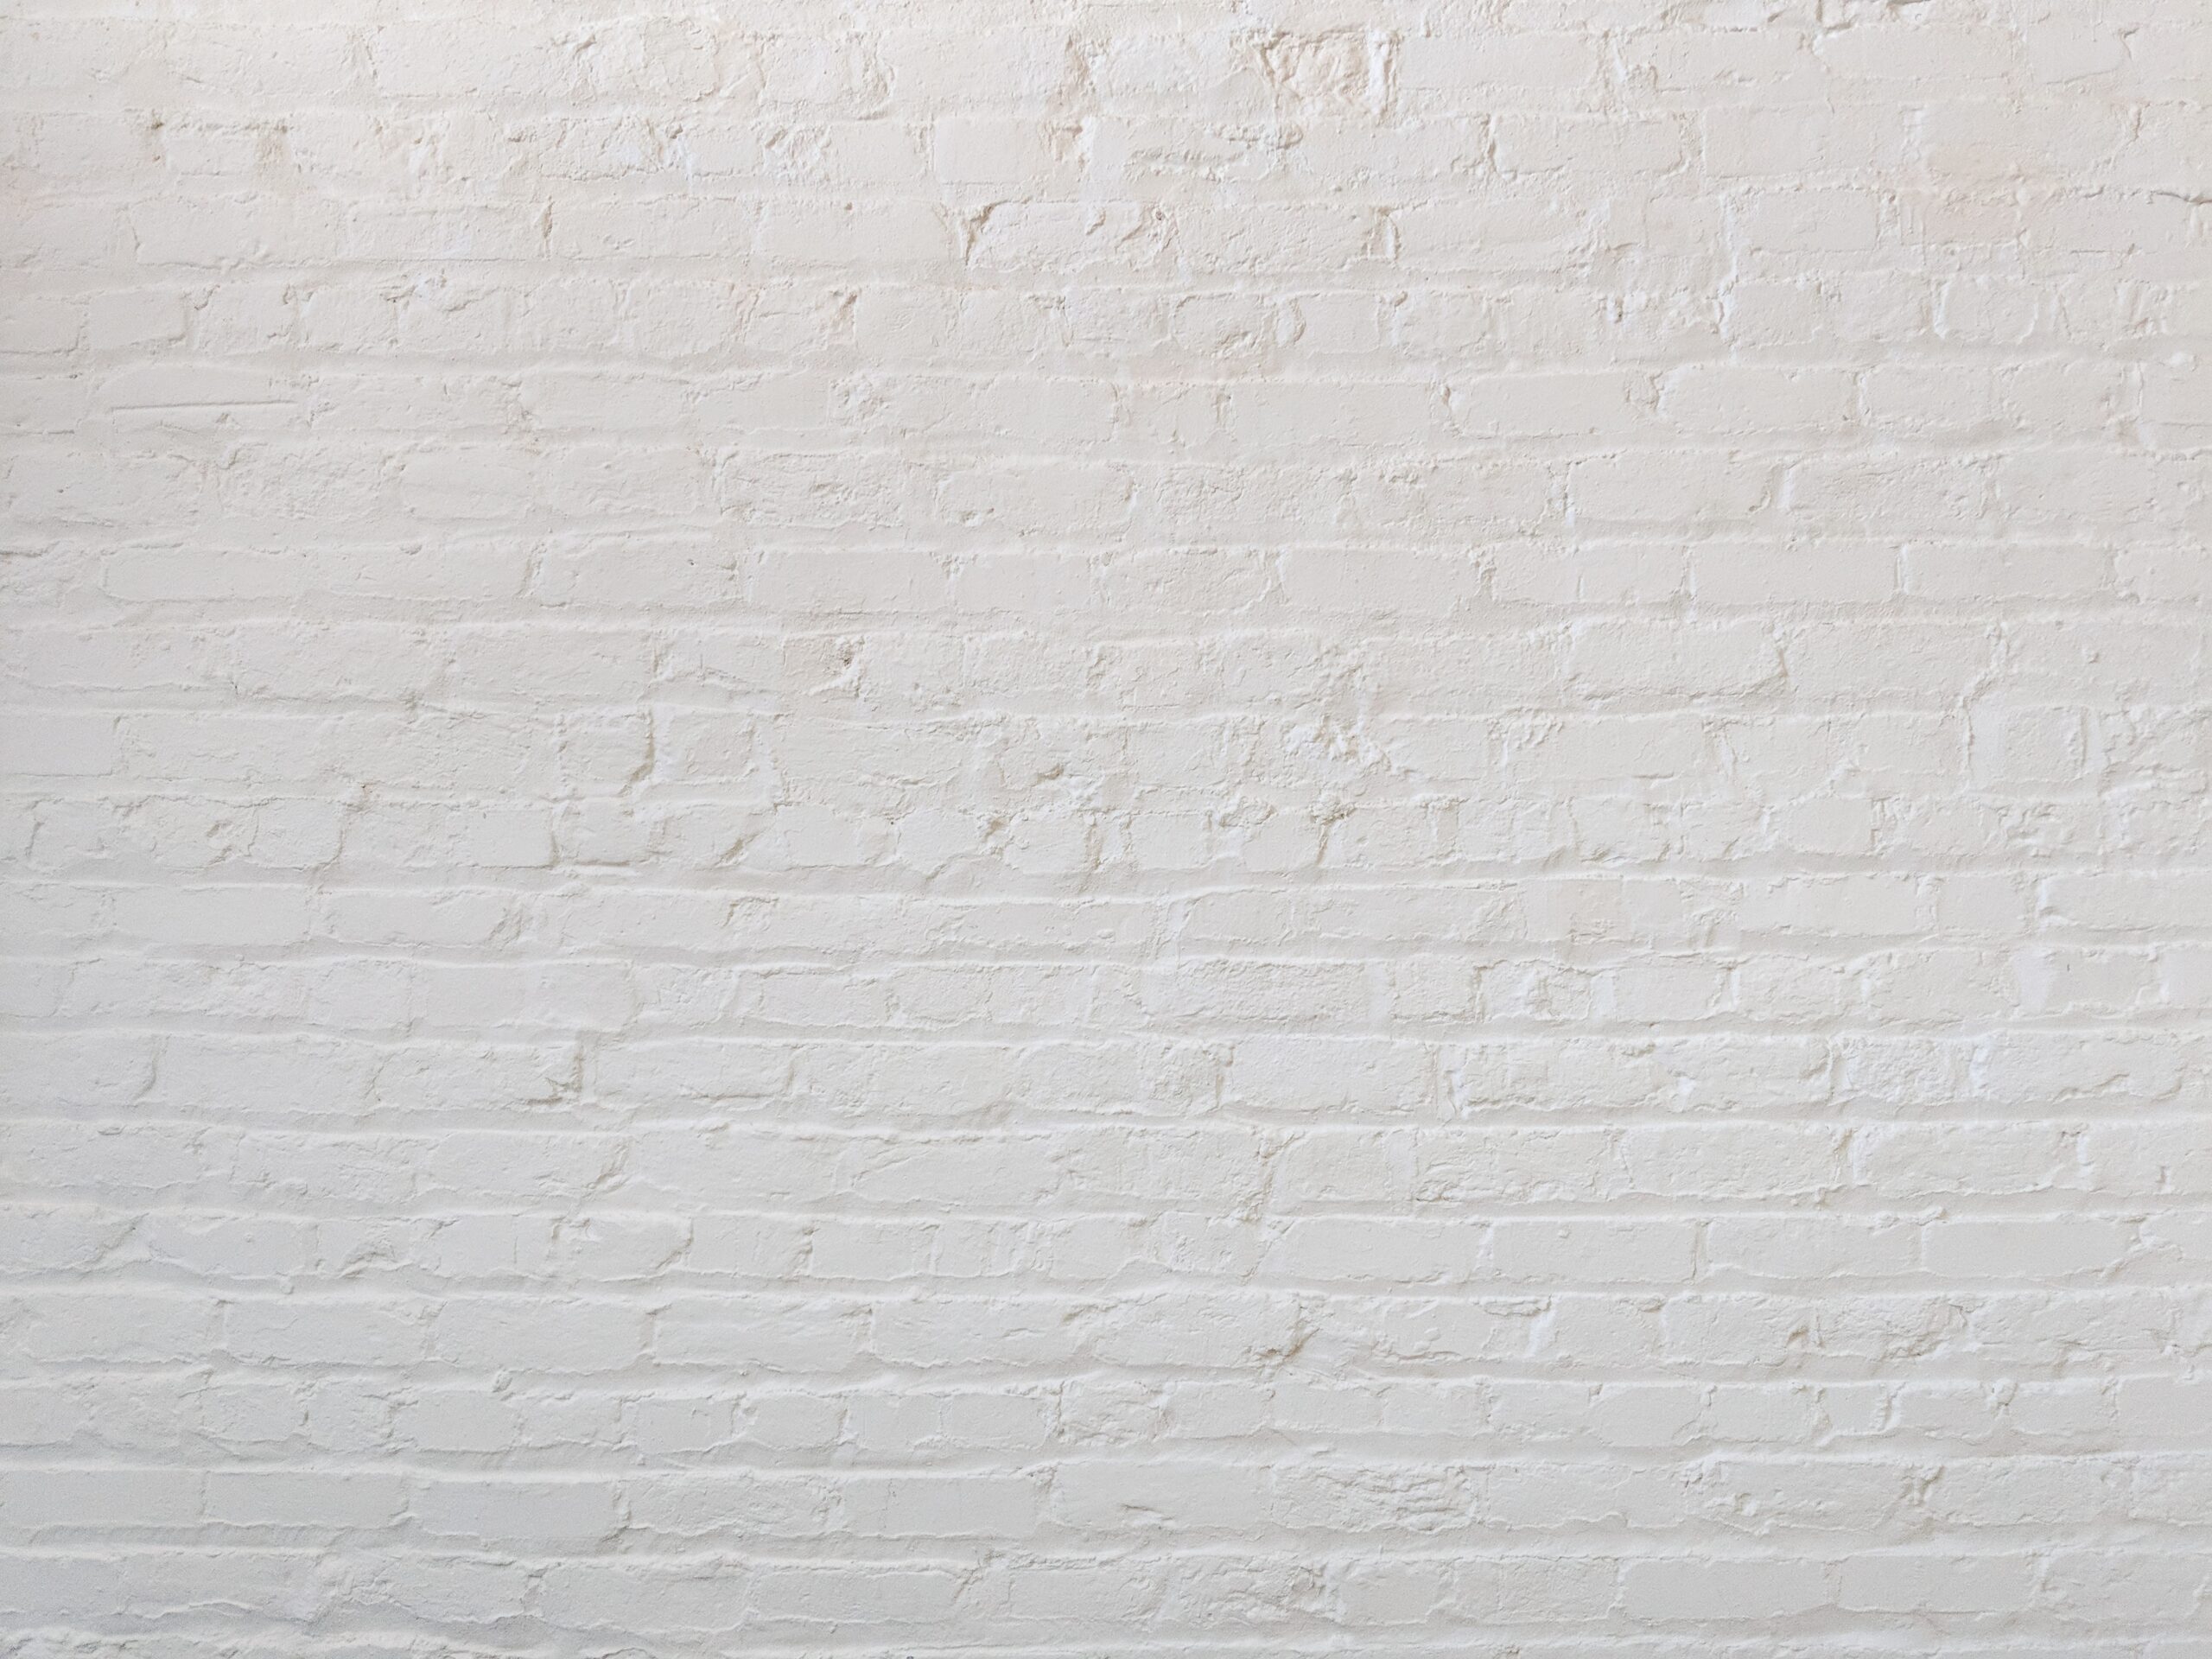 Use brick for a clean home office background that looks productive and serious to your coworkers. Pictured: A white brick wall.